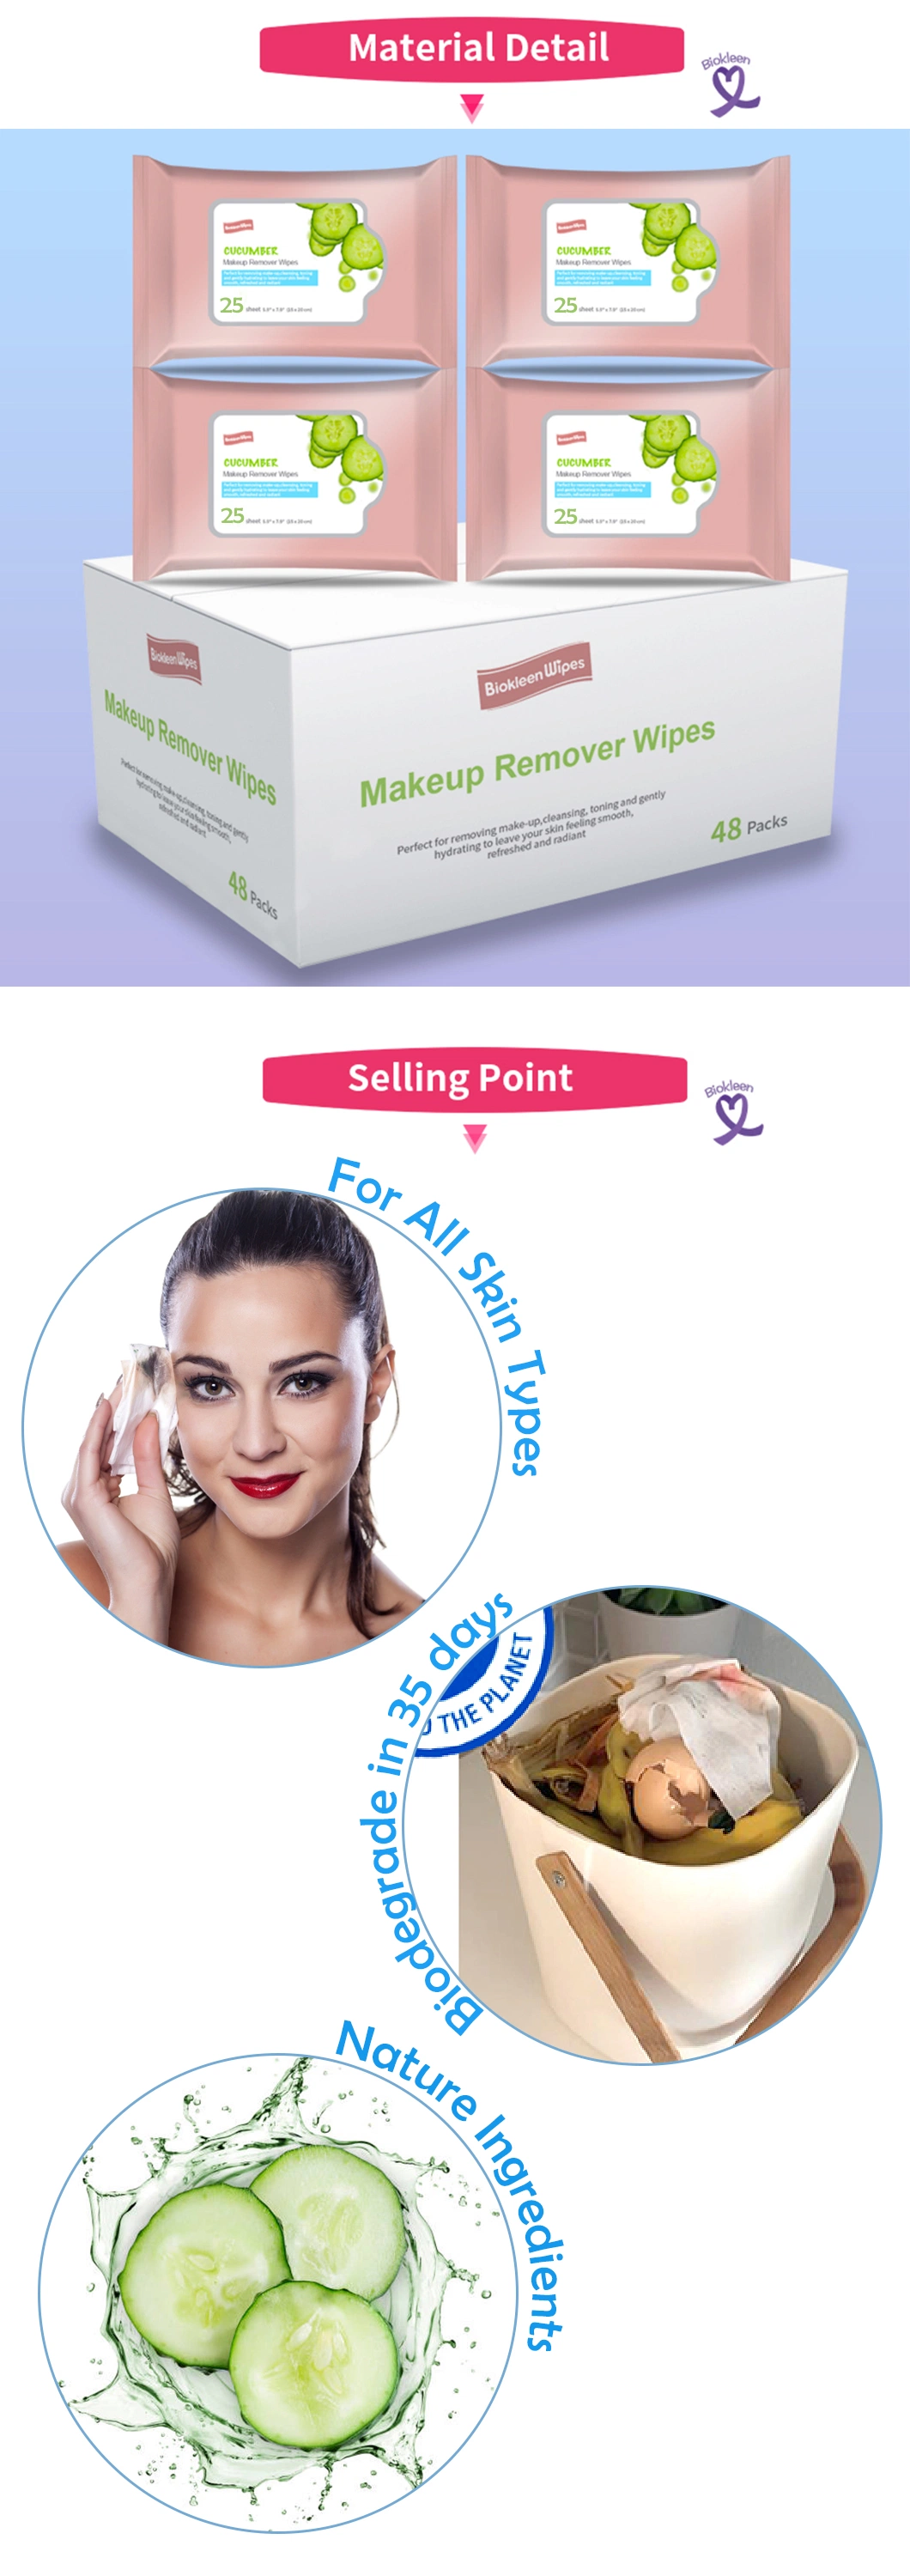 Live Clean Honest Beauty Hypoallergenic Micellar Ponds Roche Posay Dissolving Makeup Removing Age Facial Wipes Bulk